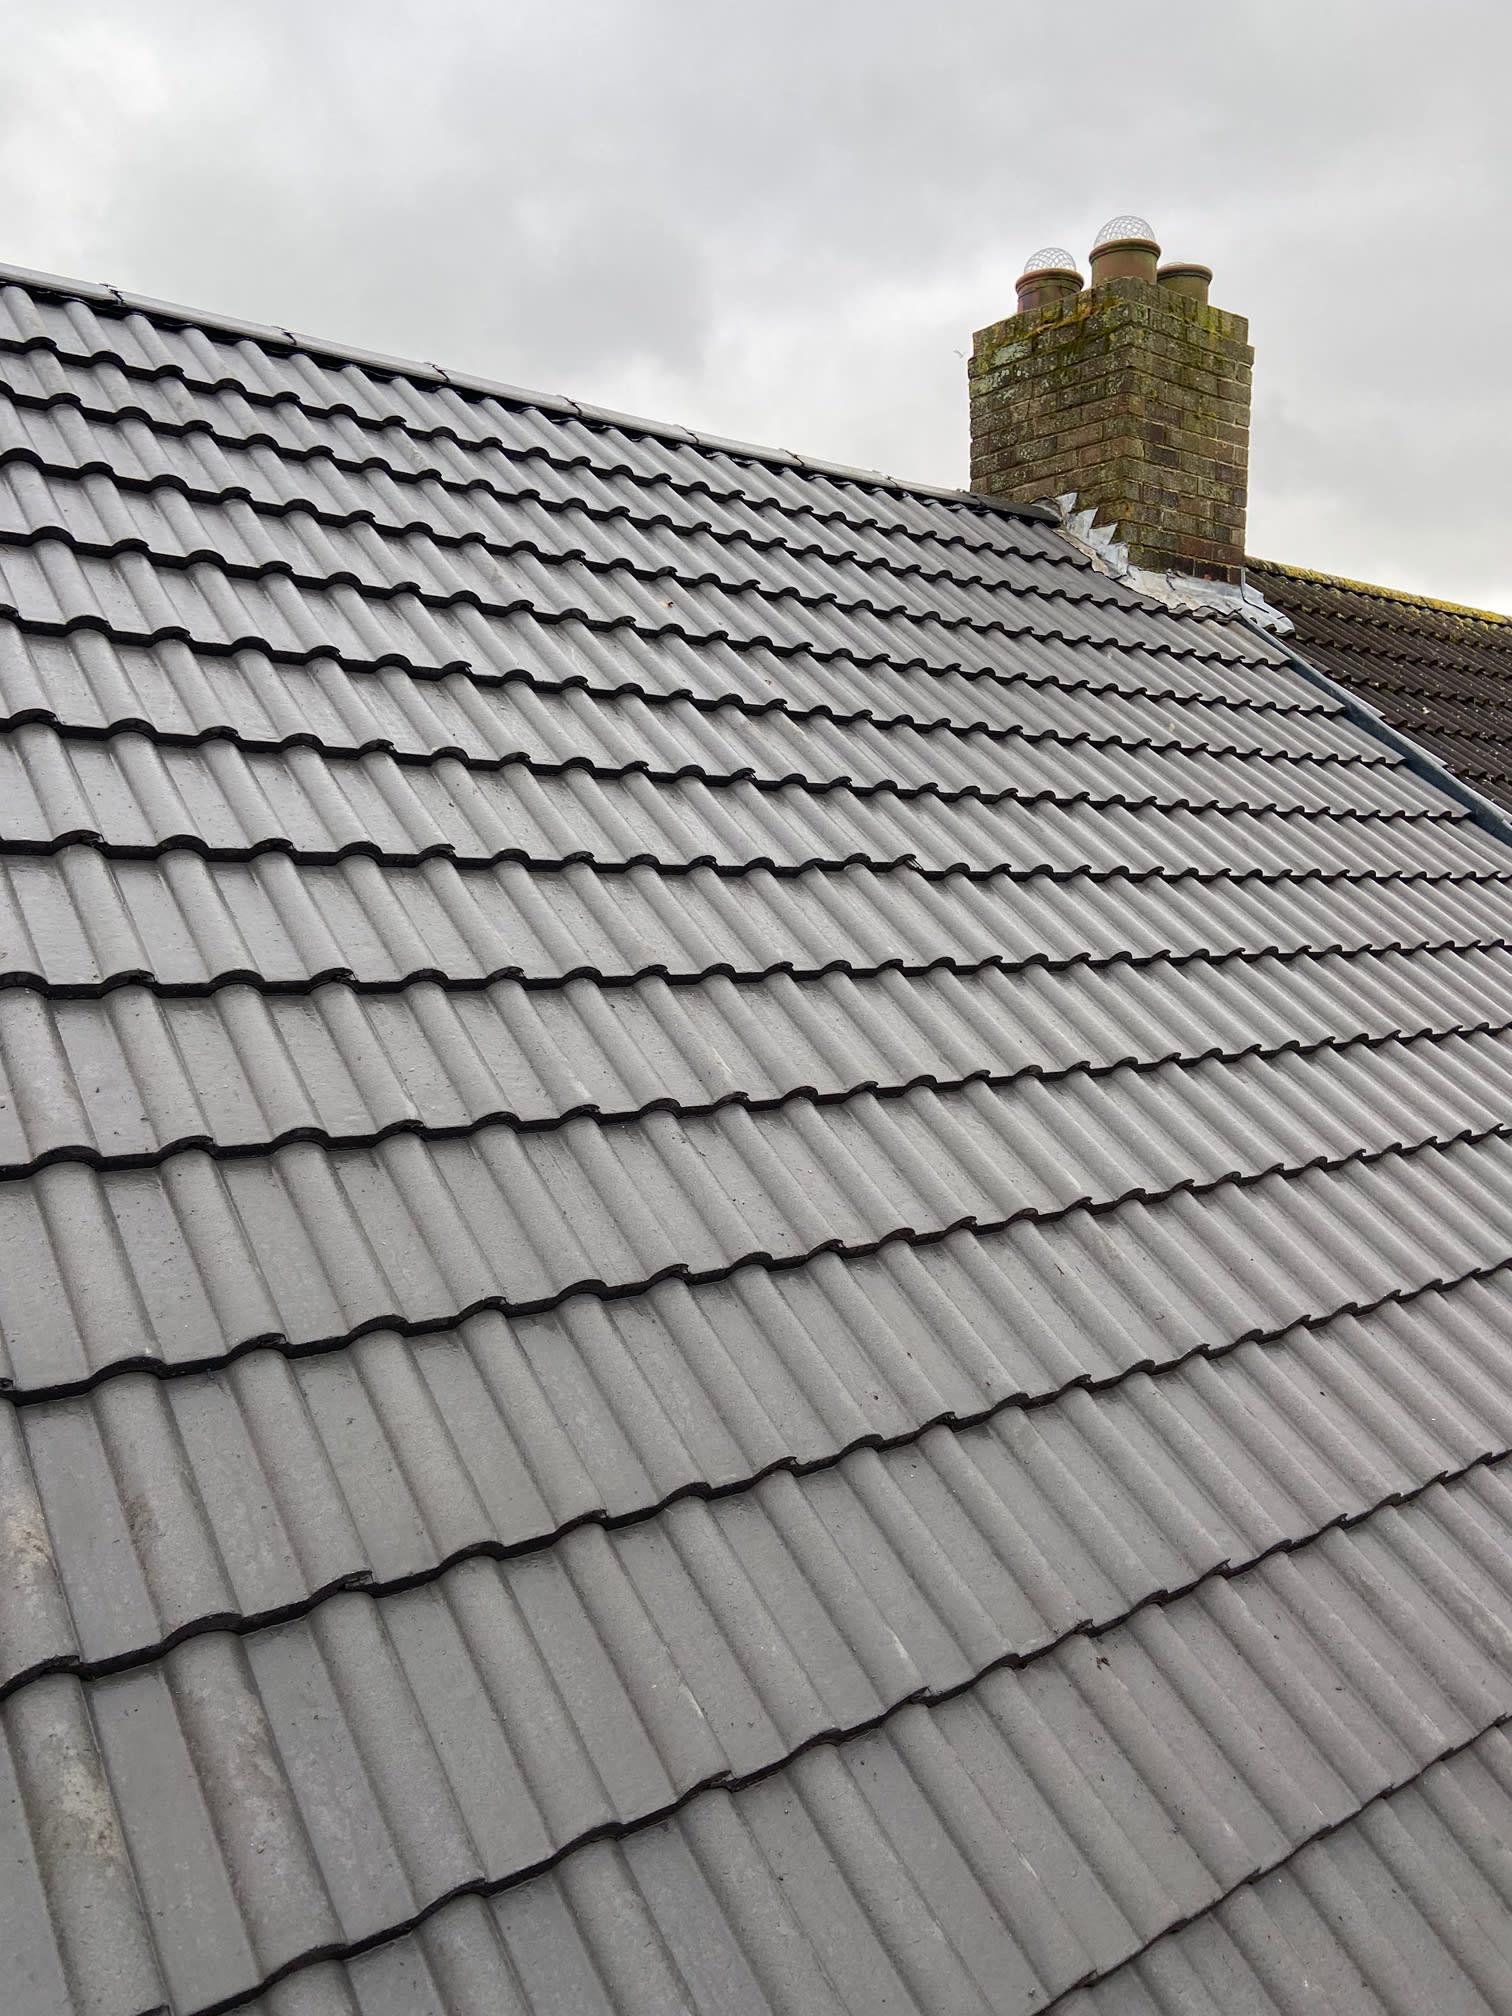 Images Roofing Care